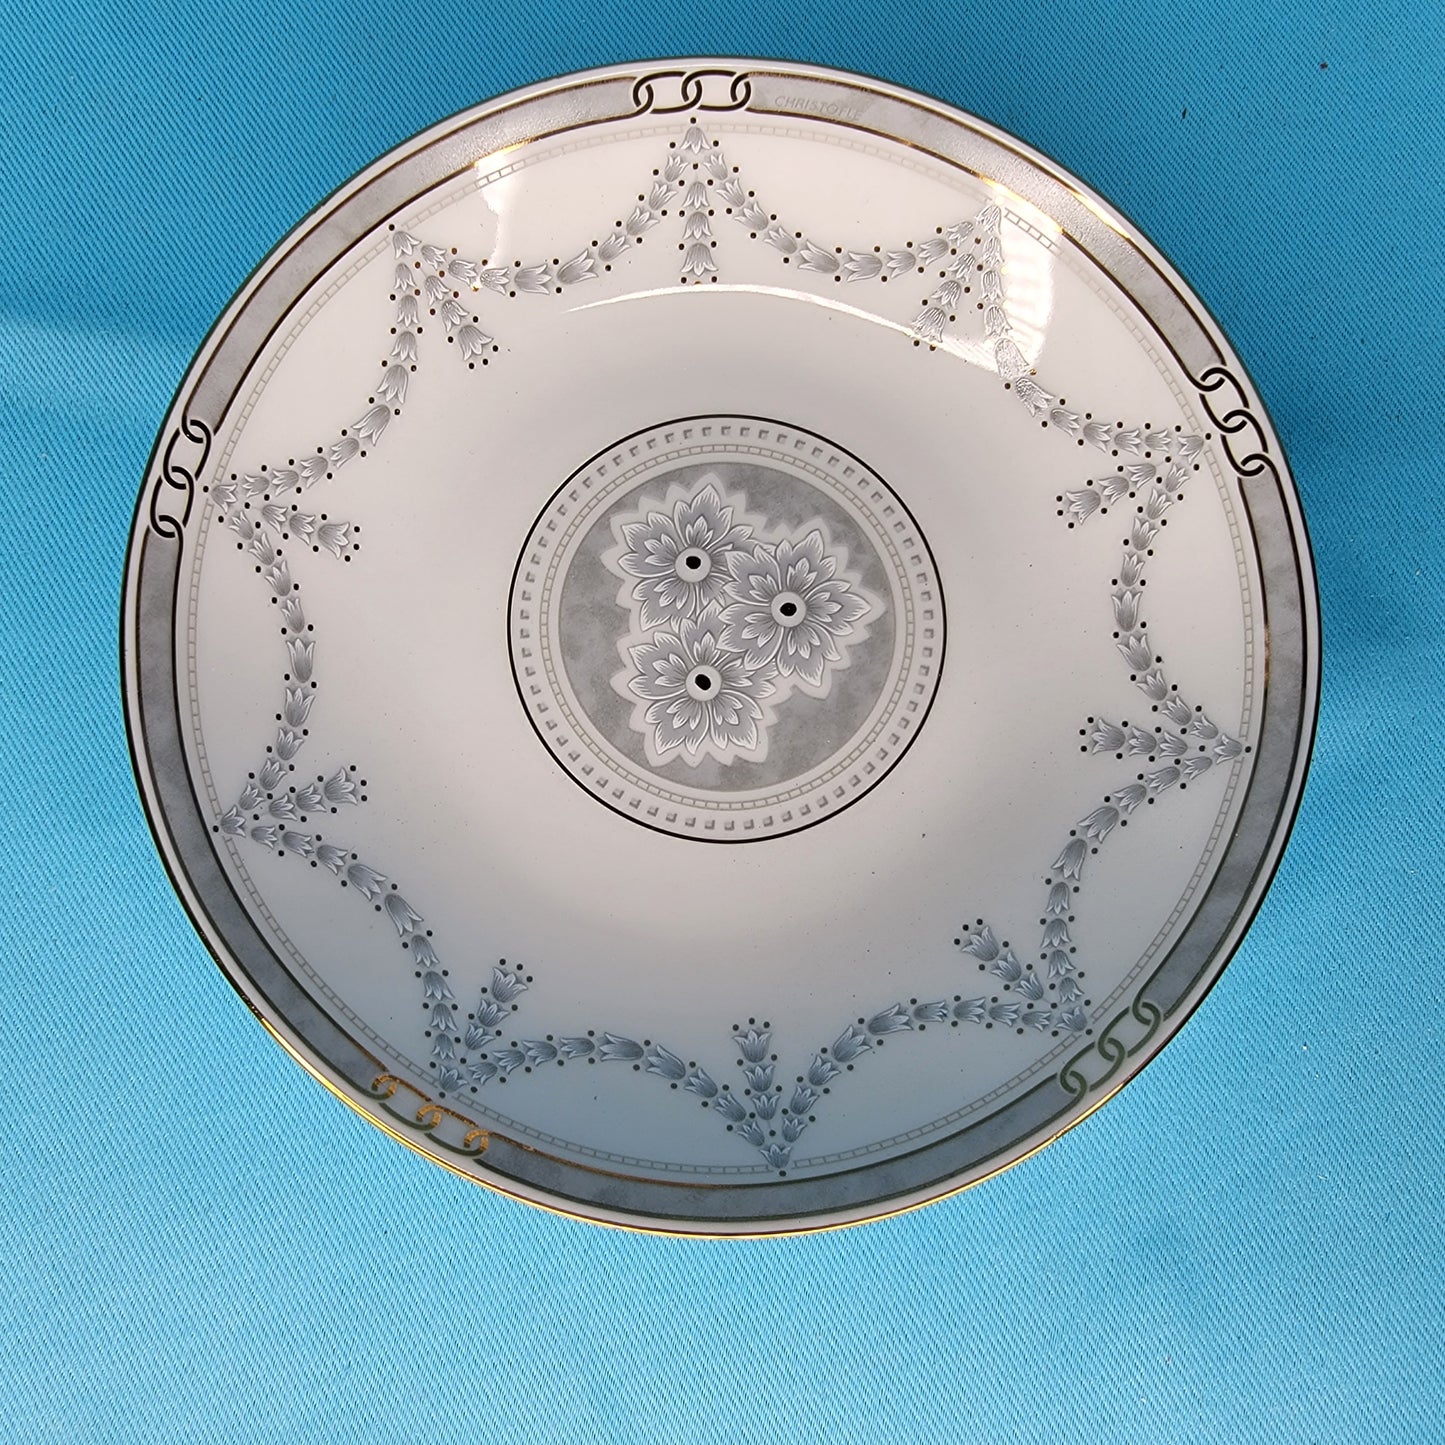 Cristofle Porcelaine Plate Alliance Gris Marquise WENDY